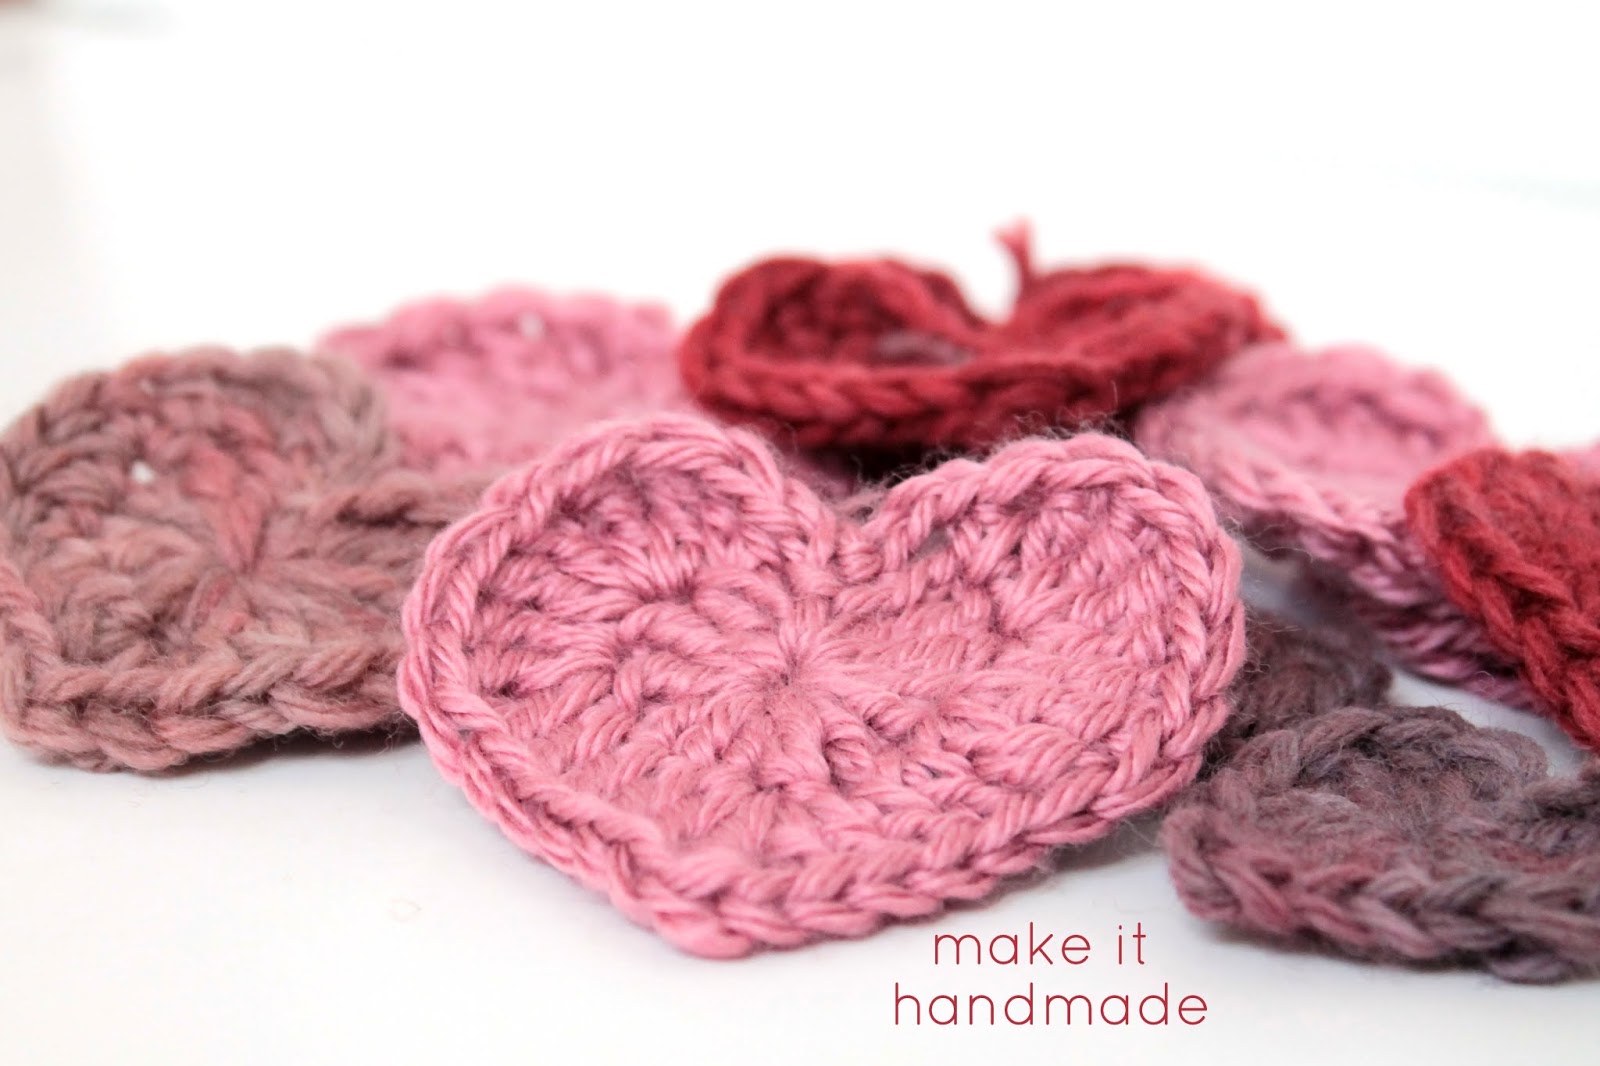 Yarn Heart Magnets for Valentine's Day